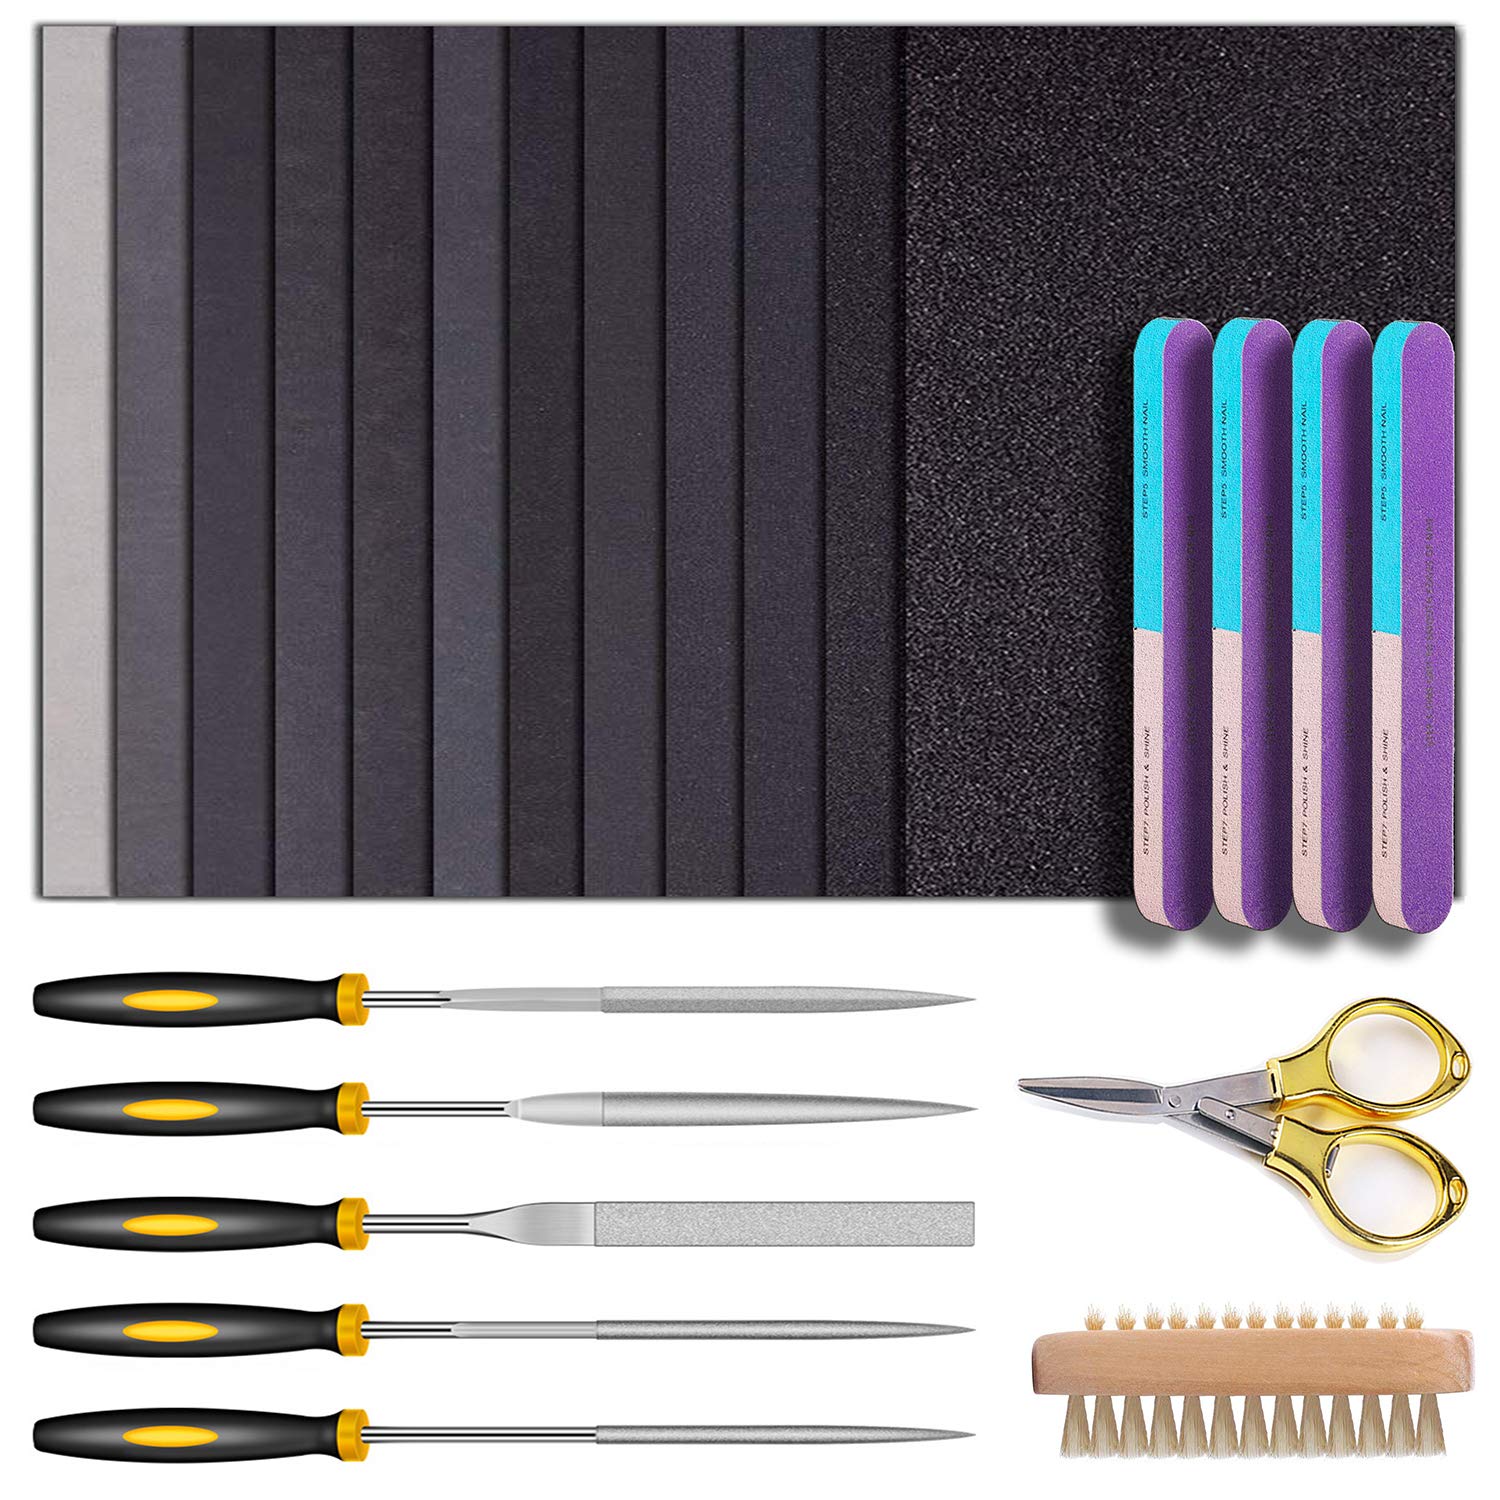 Resin Sanding and Polishing Kit,23 Pieces YASPIT Resin Casting Tools Set,  Include Sand Papers,Resin File,Polishing Blocks,Scissors,Wooden Brush for